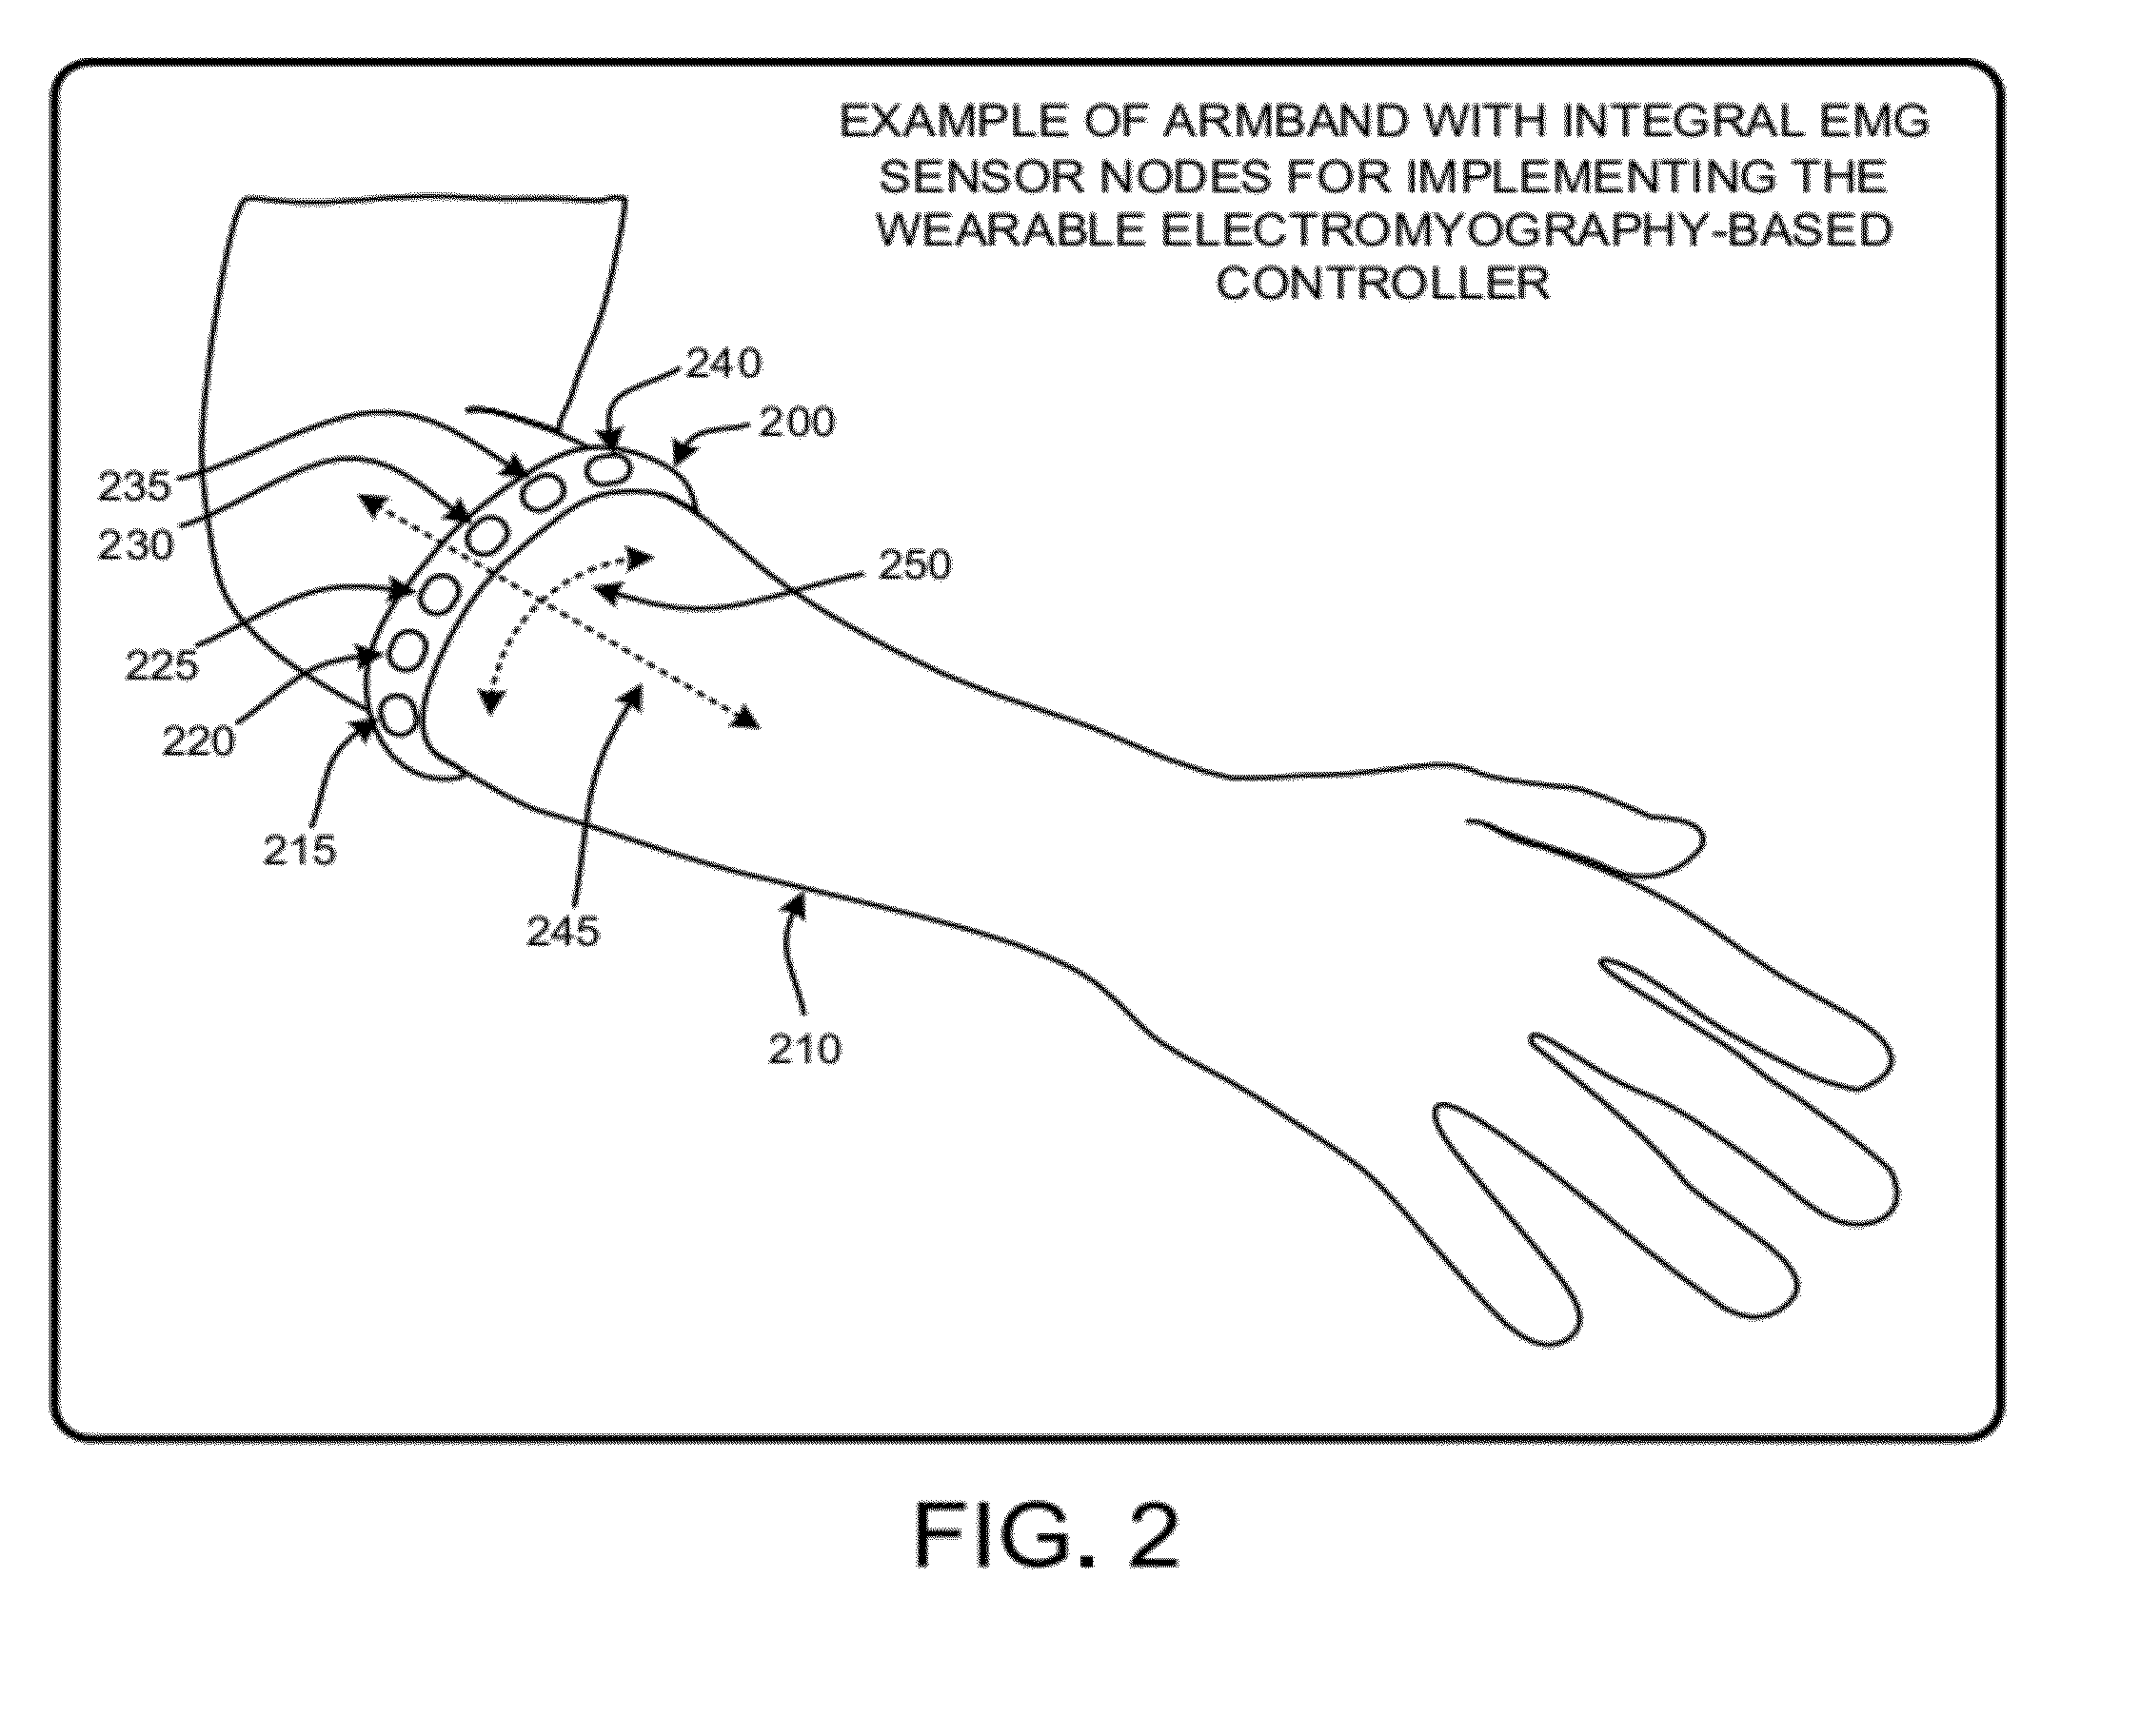 Wearable electromyography-based human-computer interface